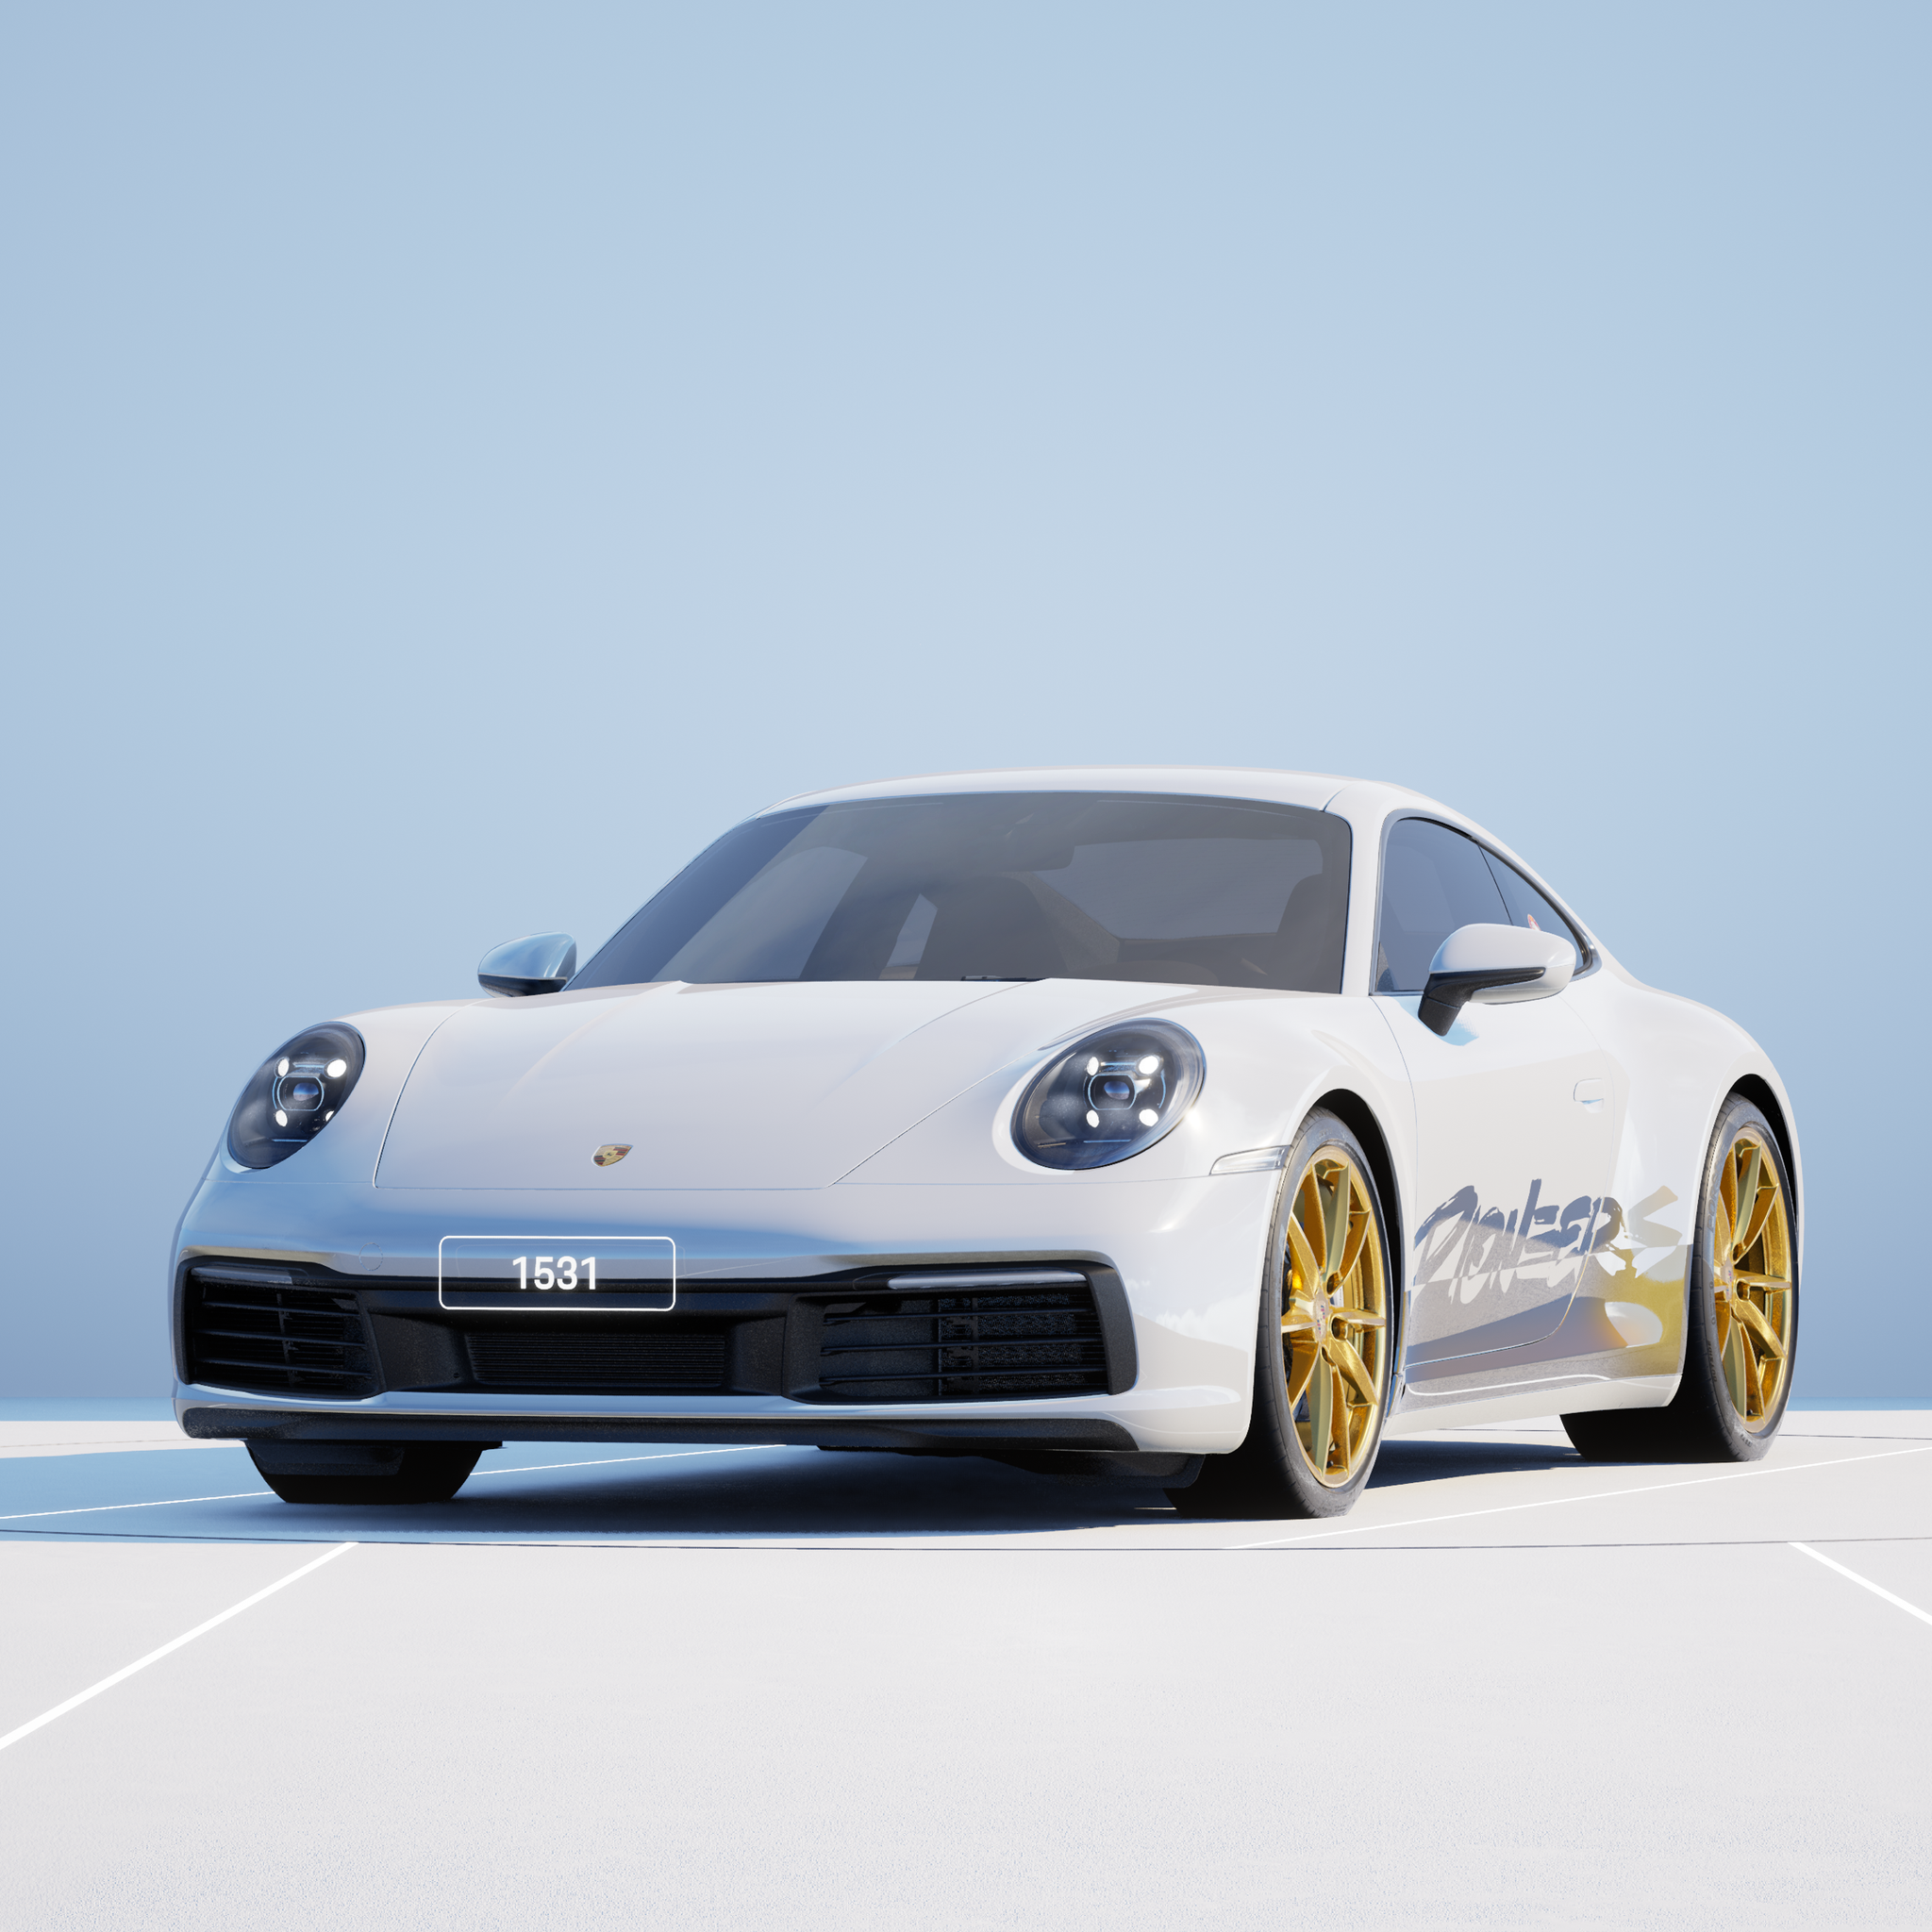 The PORSCHΞ 911 1531 image in phase